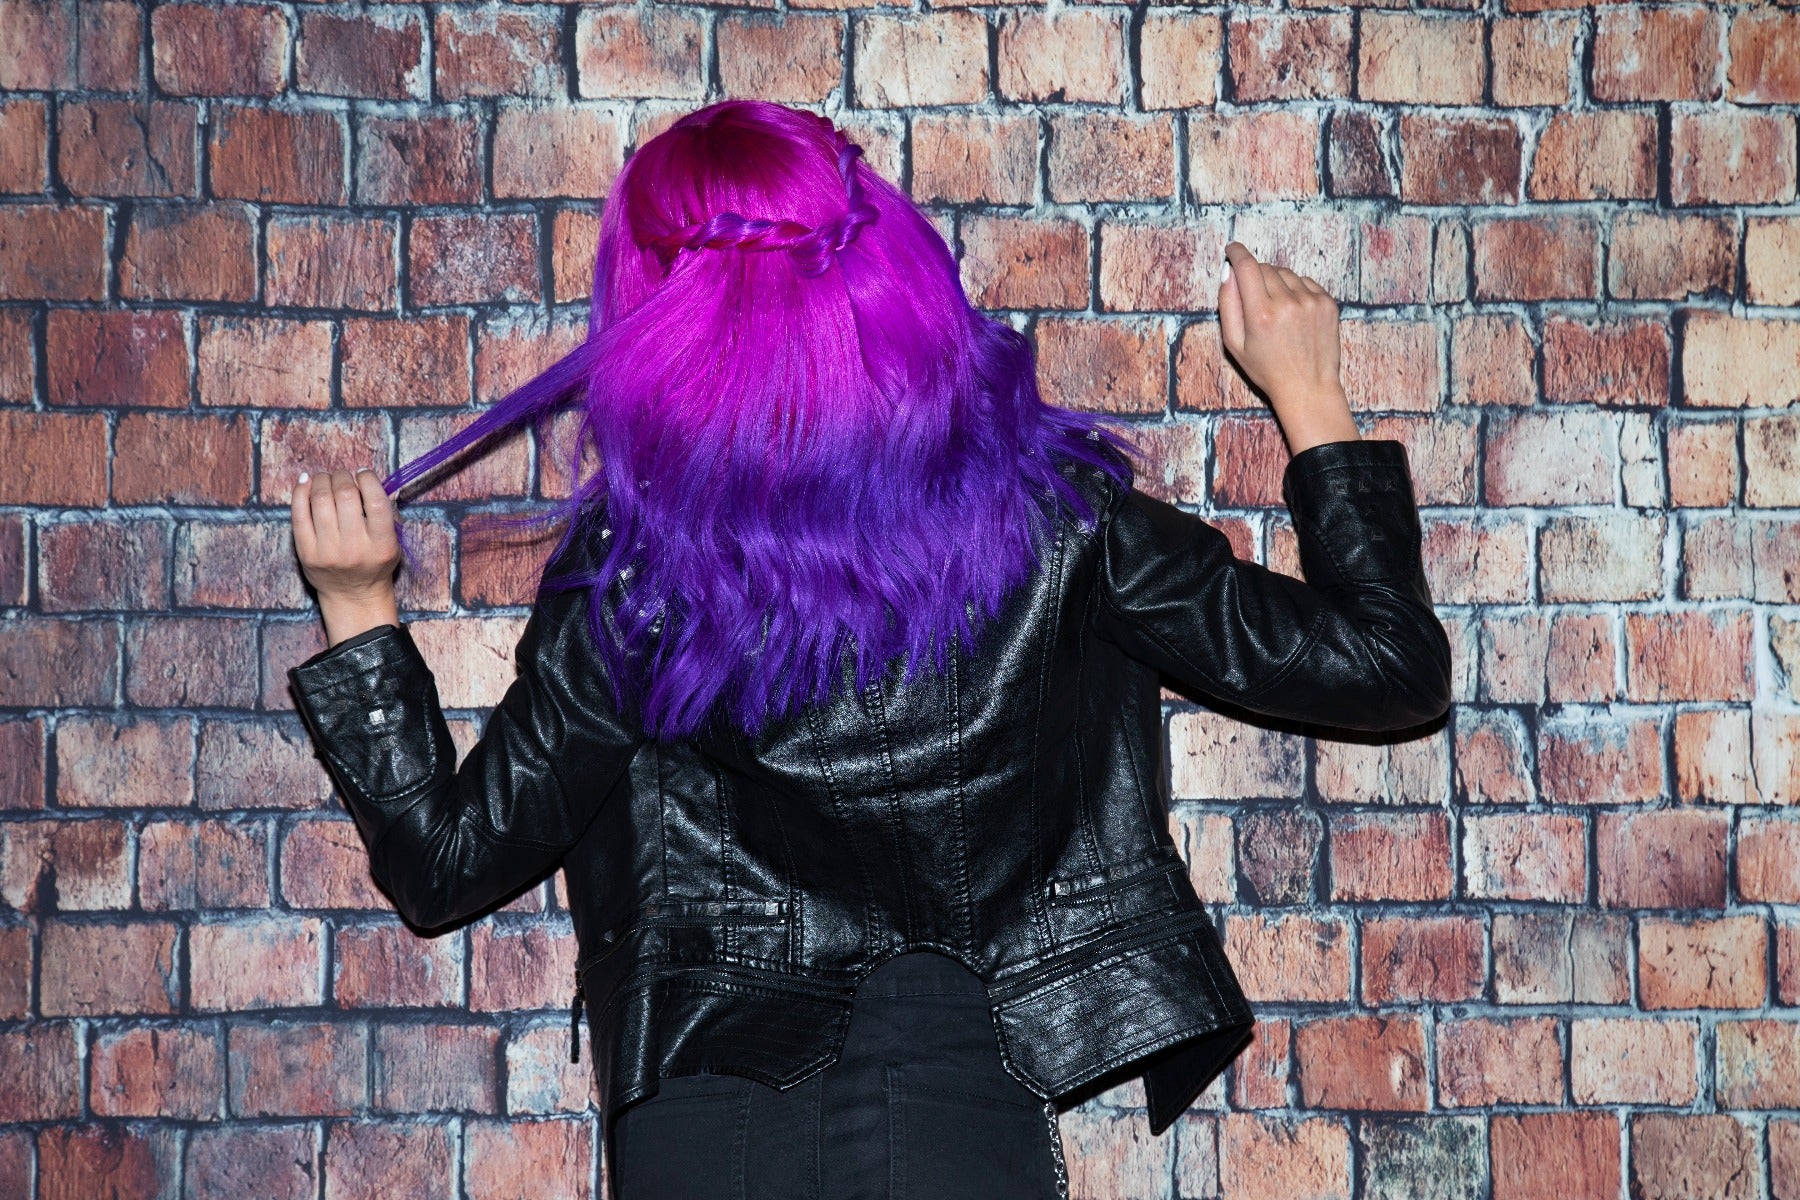 Splat Hair Dye Purple and Pink Ombre Semi-Permanent Vegan Hair Color Kit with Bleach